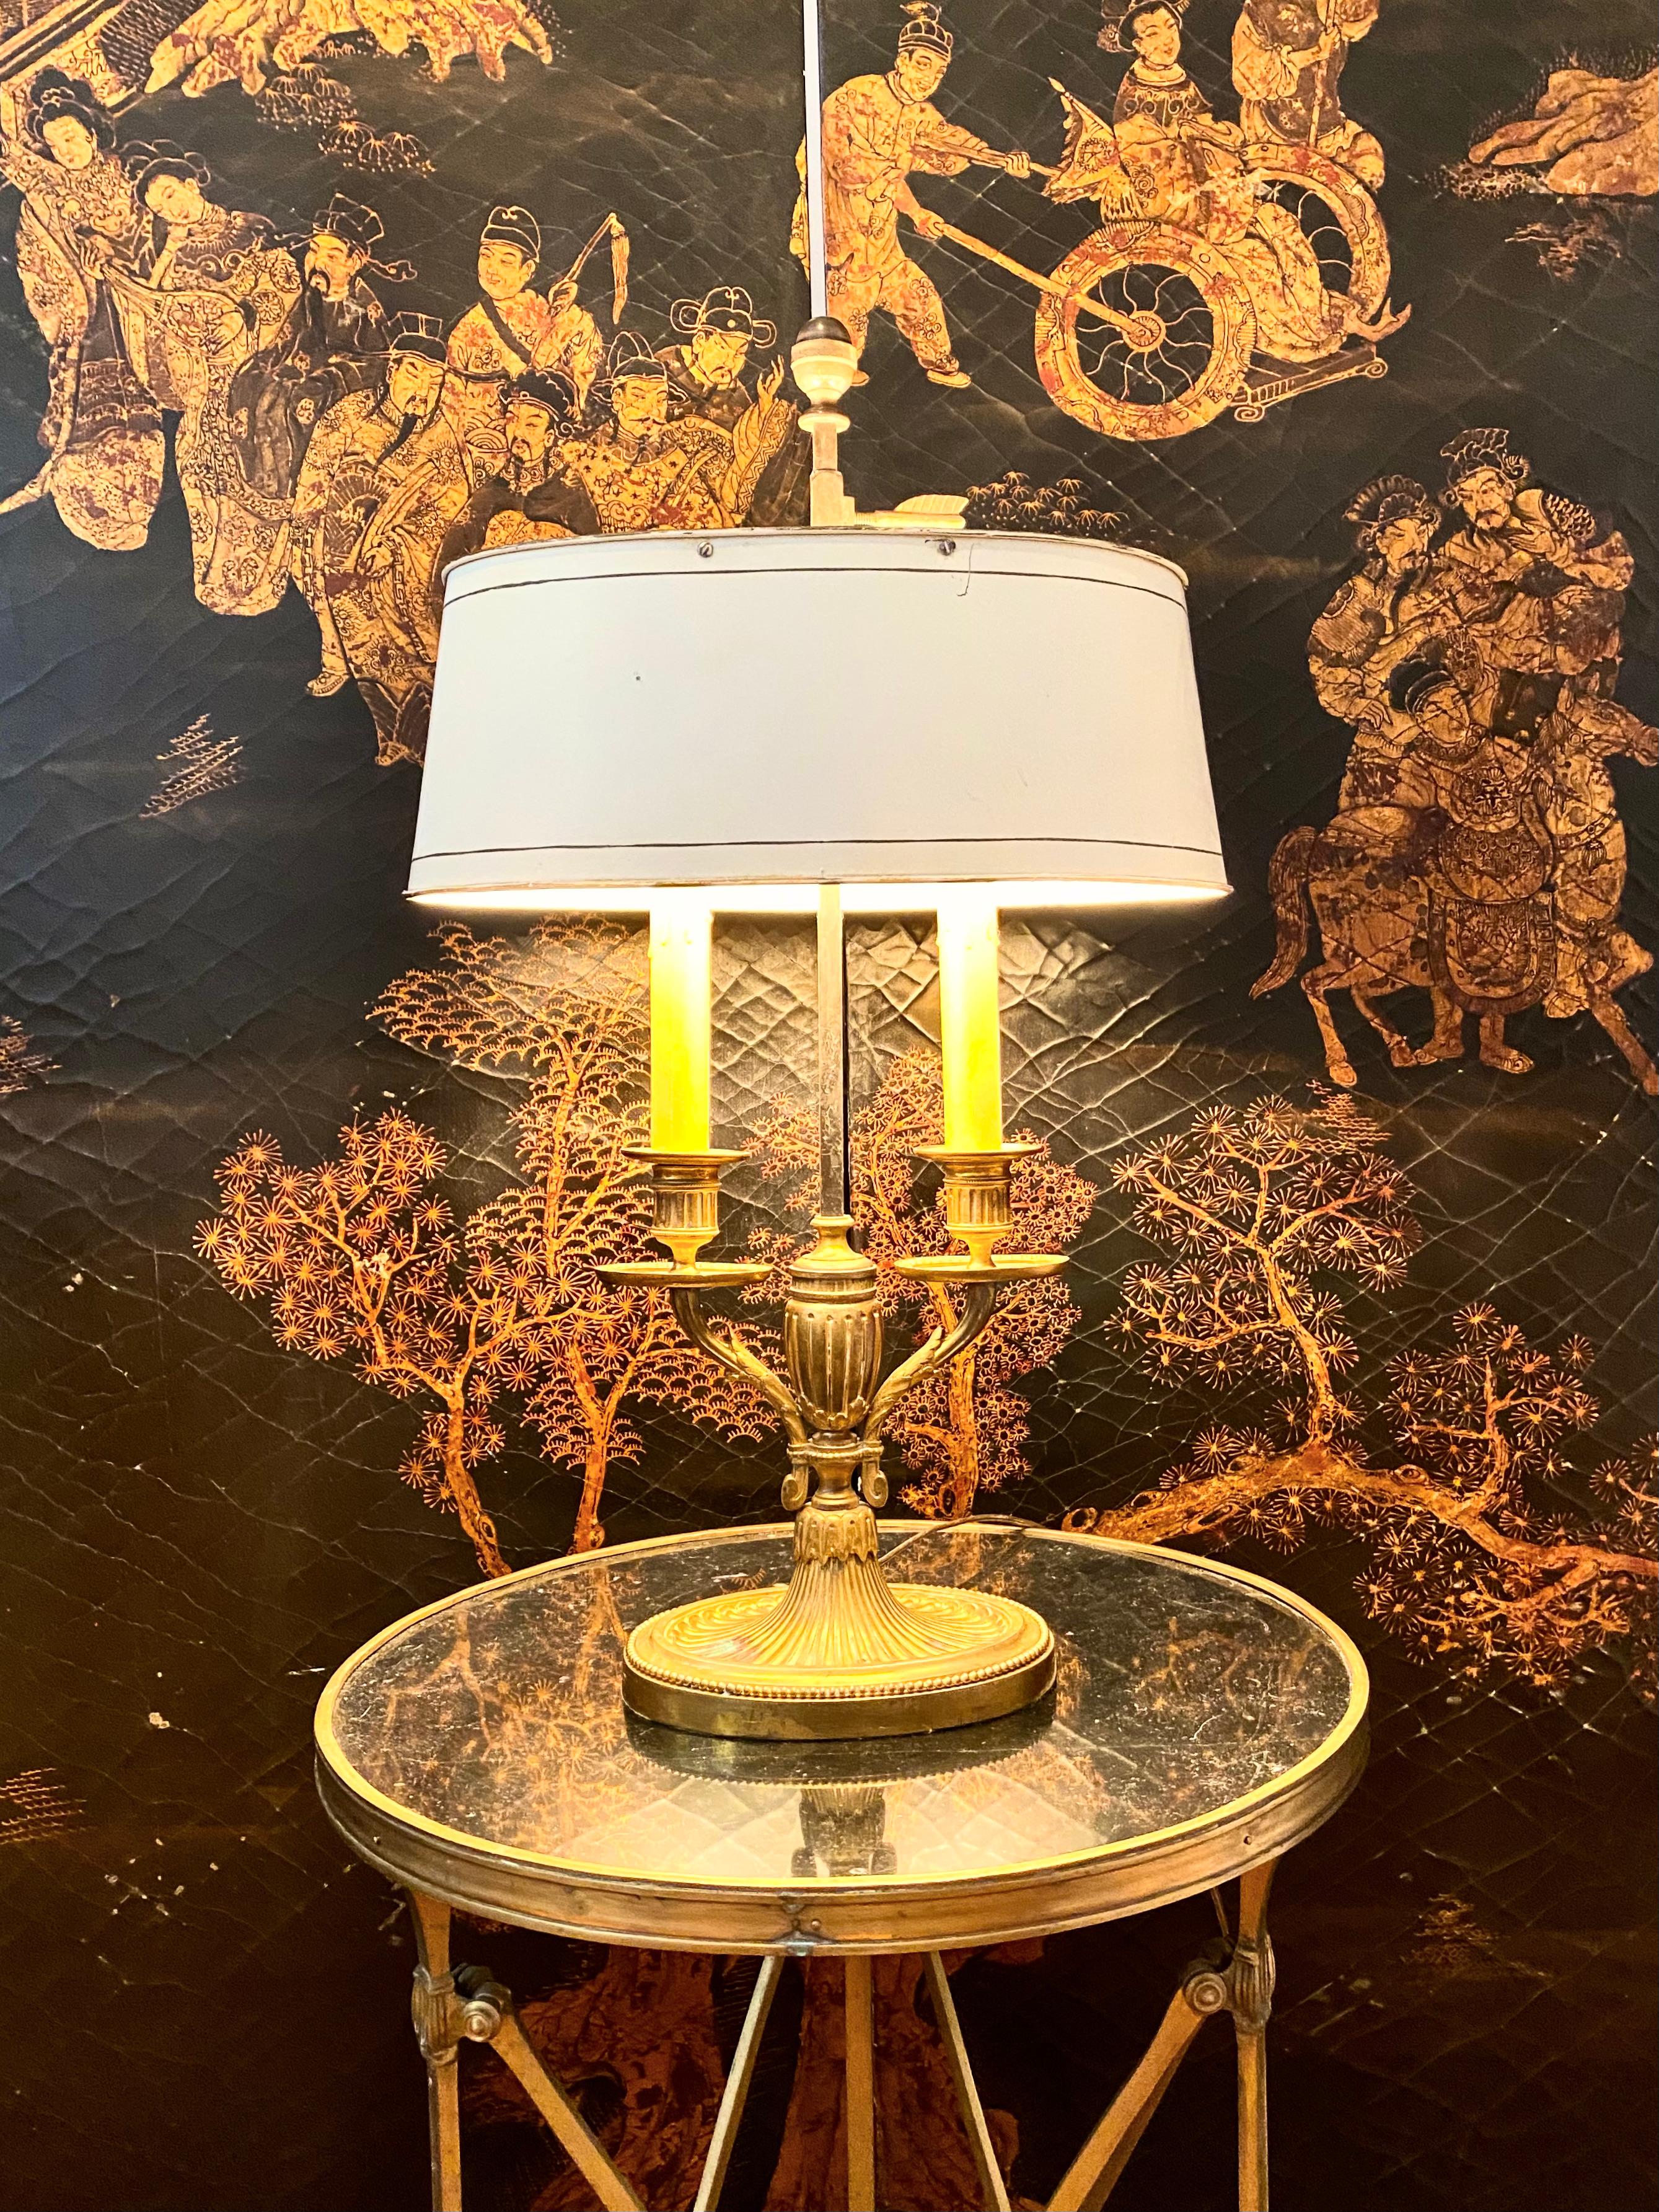 Empire bronze bouillotte lamp, off-white tôle shade.
Empire style bronze 2-arm bouillotte lamp with off-white tôle shade. Classic Empire symbols of the arrow and neo-classical references such as the urn, the pedestal, the acanthus leaves.
Electric